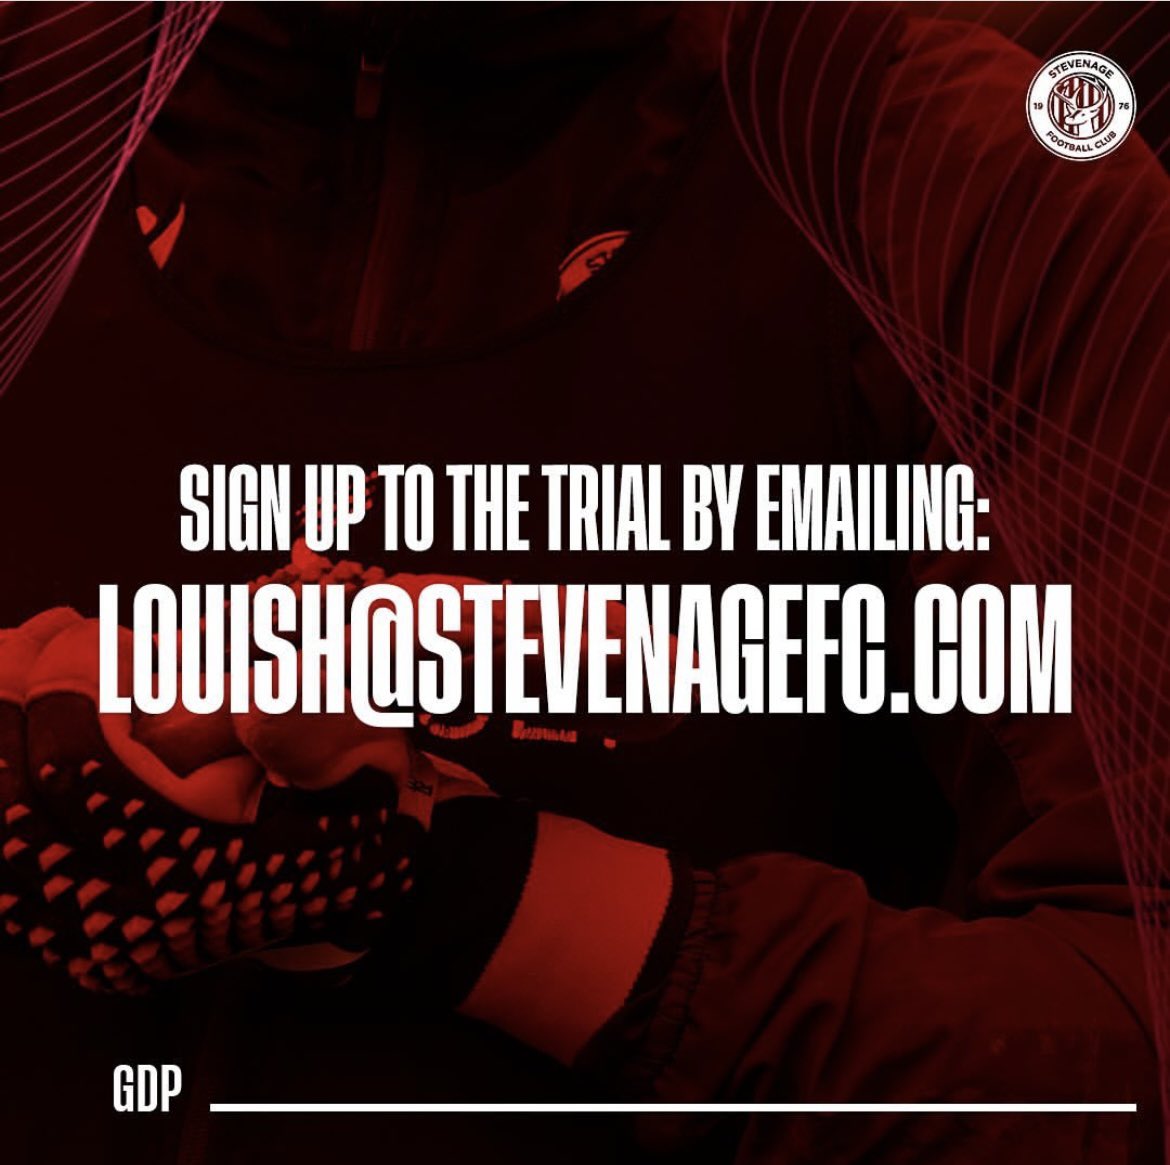 🚨GDP Trials 🚨 If you are aged between 16-19 years old and are interested in studying and training full time please email louish@stevenagefc.com or visit borotickets.com regarding signing up for the trial on 9th April.